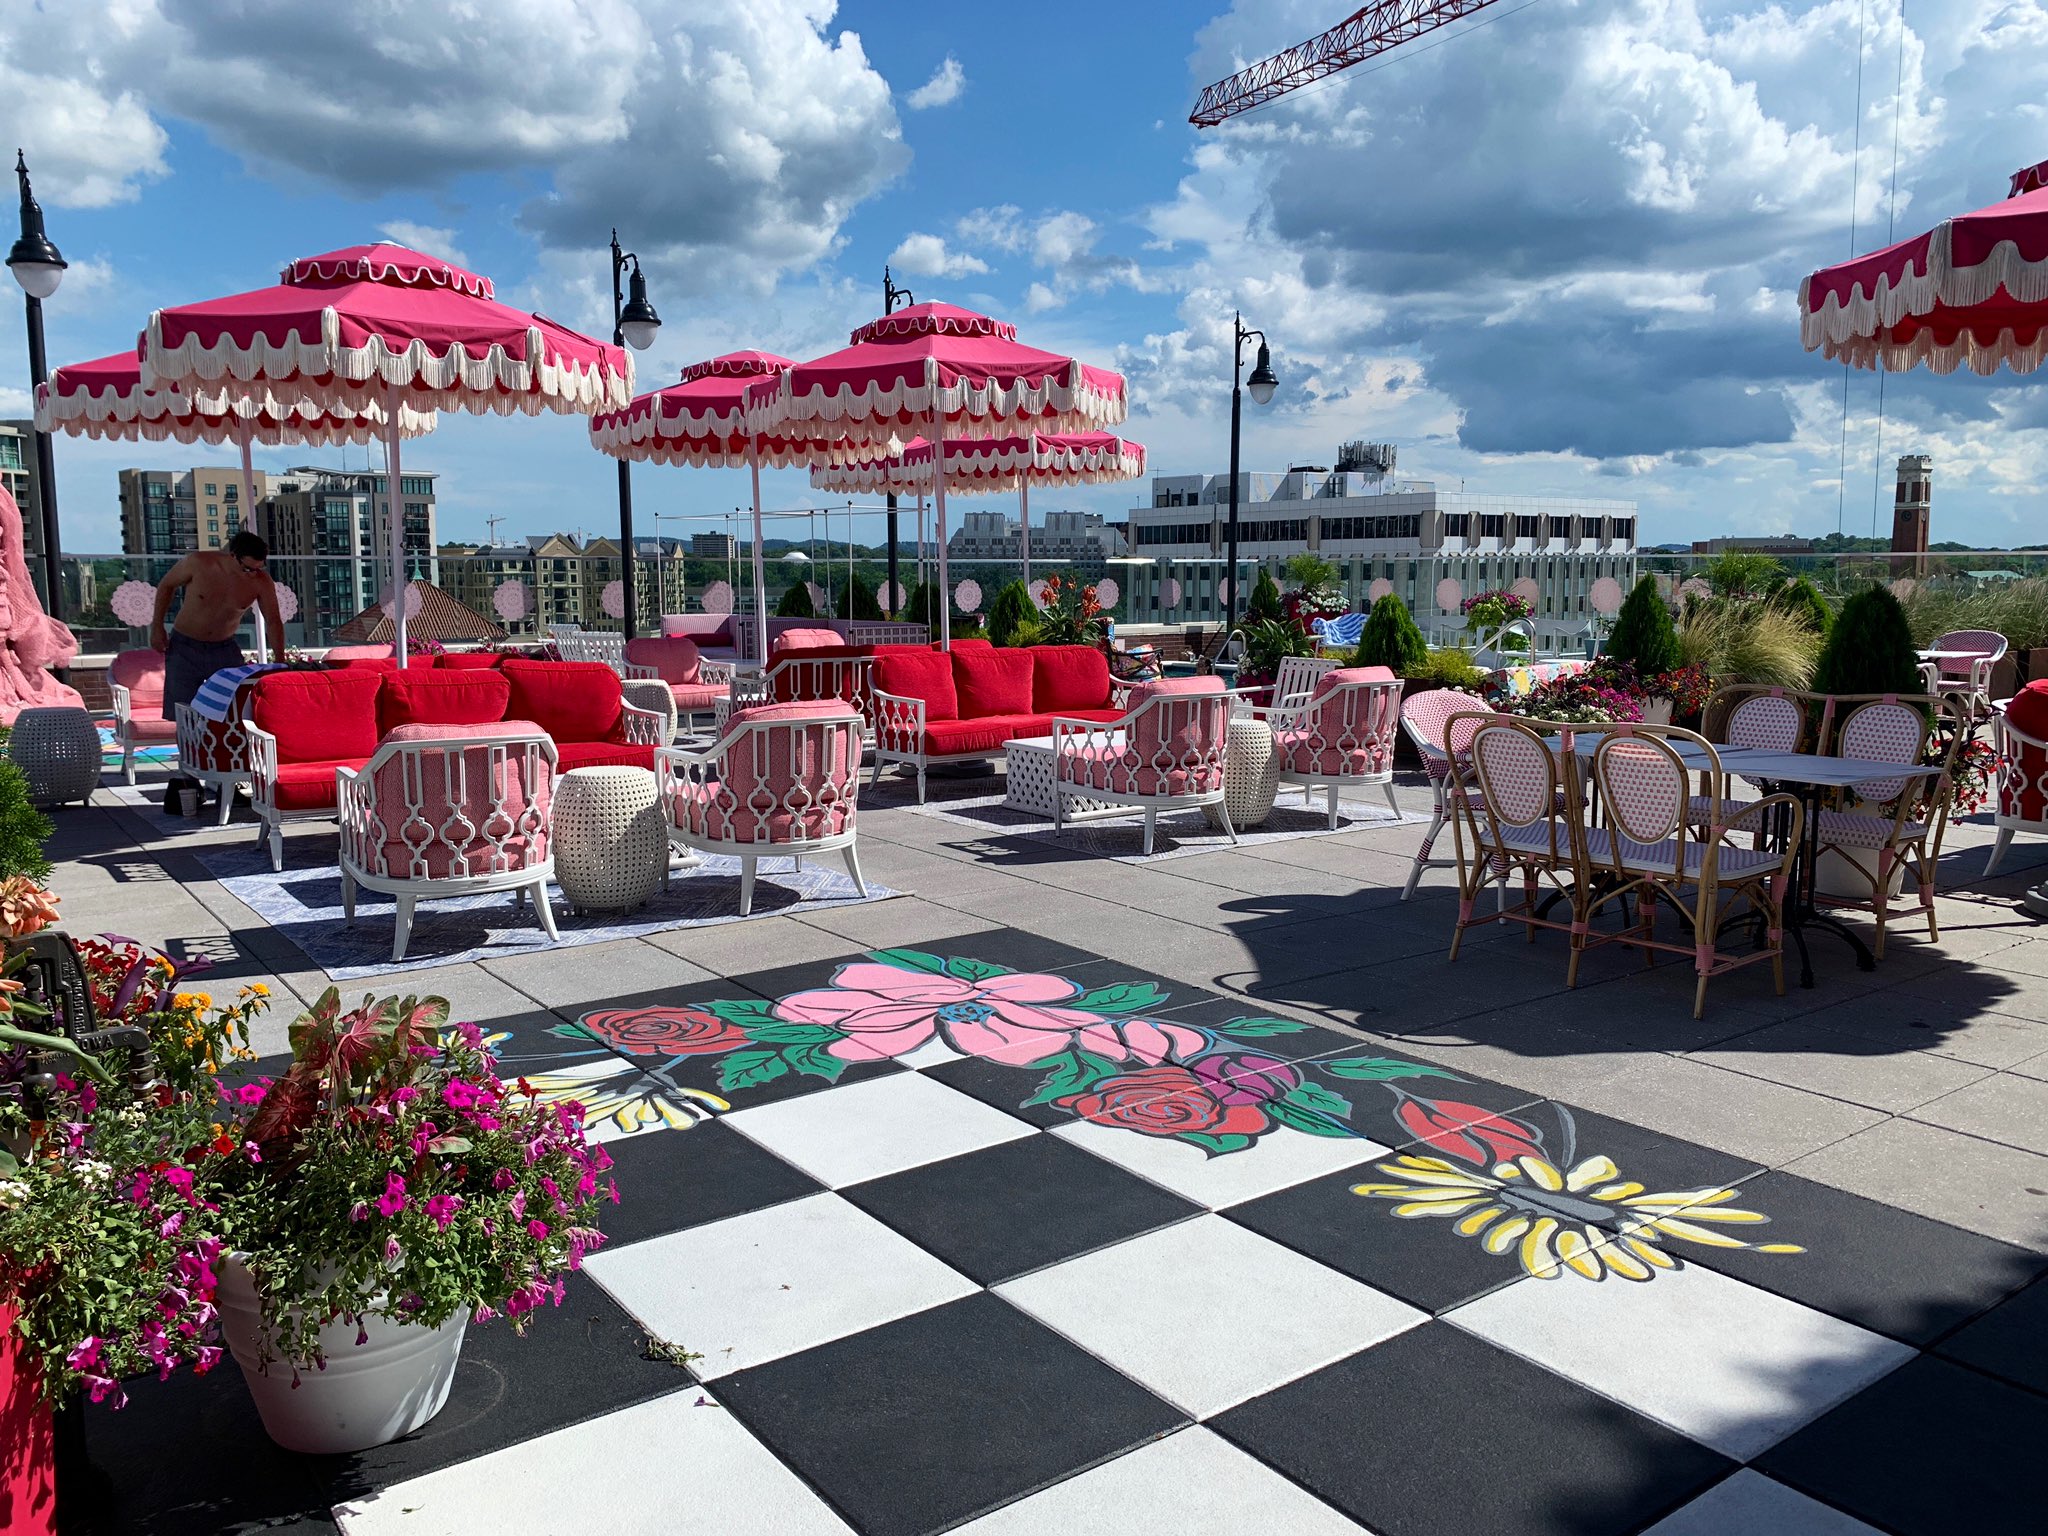 Nashville Tennessee On Twitter White Limozeen A Dollyparton Inspired Rooftop Bar Just Opened Up On Top Of Nashville S Graduate Hotels And It S Looking Pretty Fab Https T Co 2xjrdzjewj